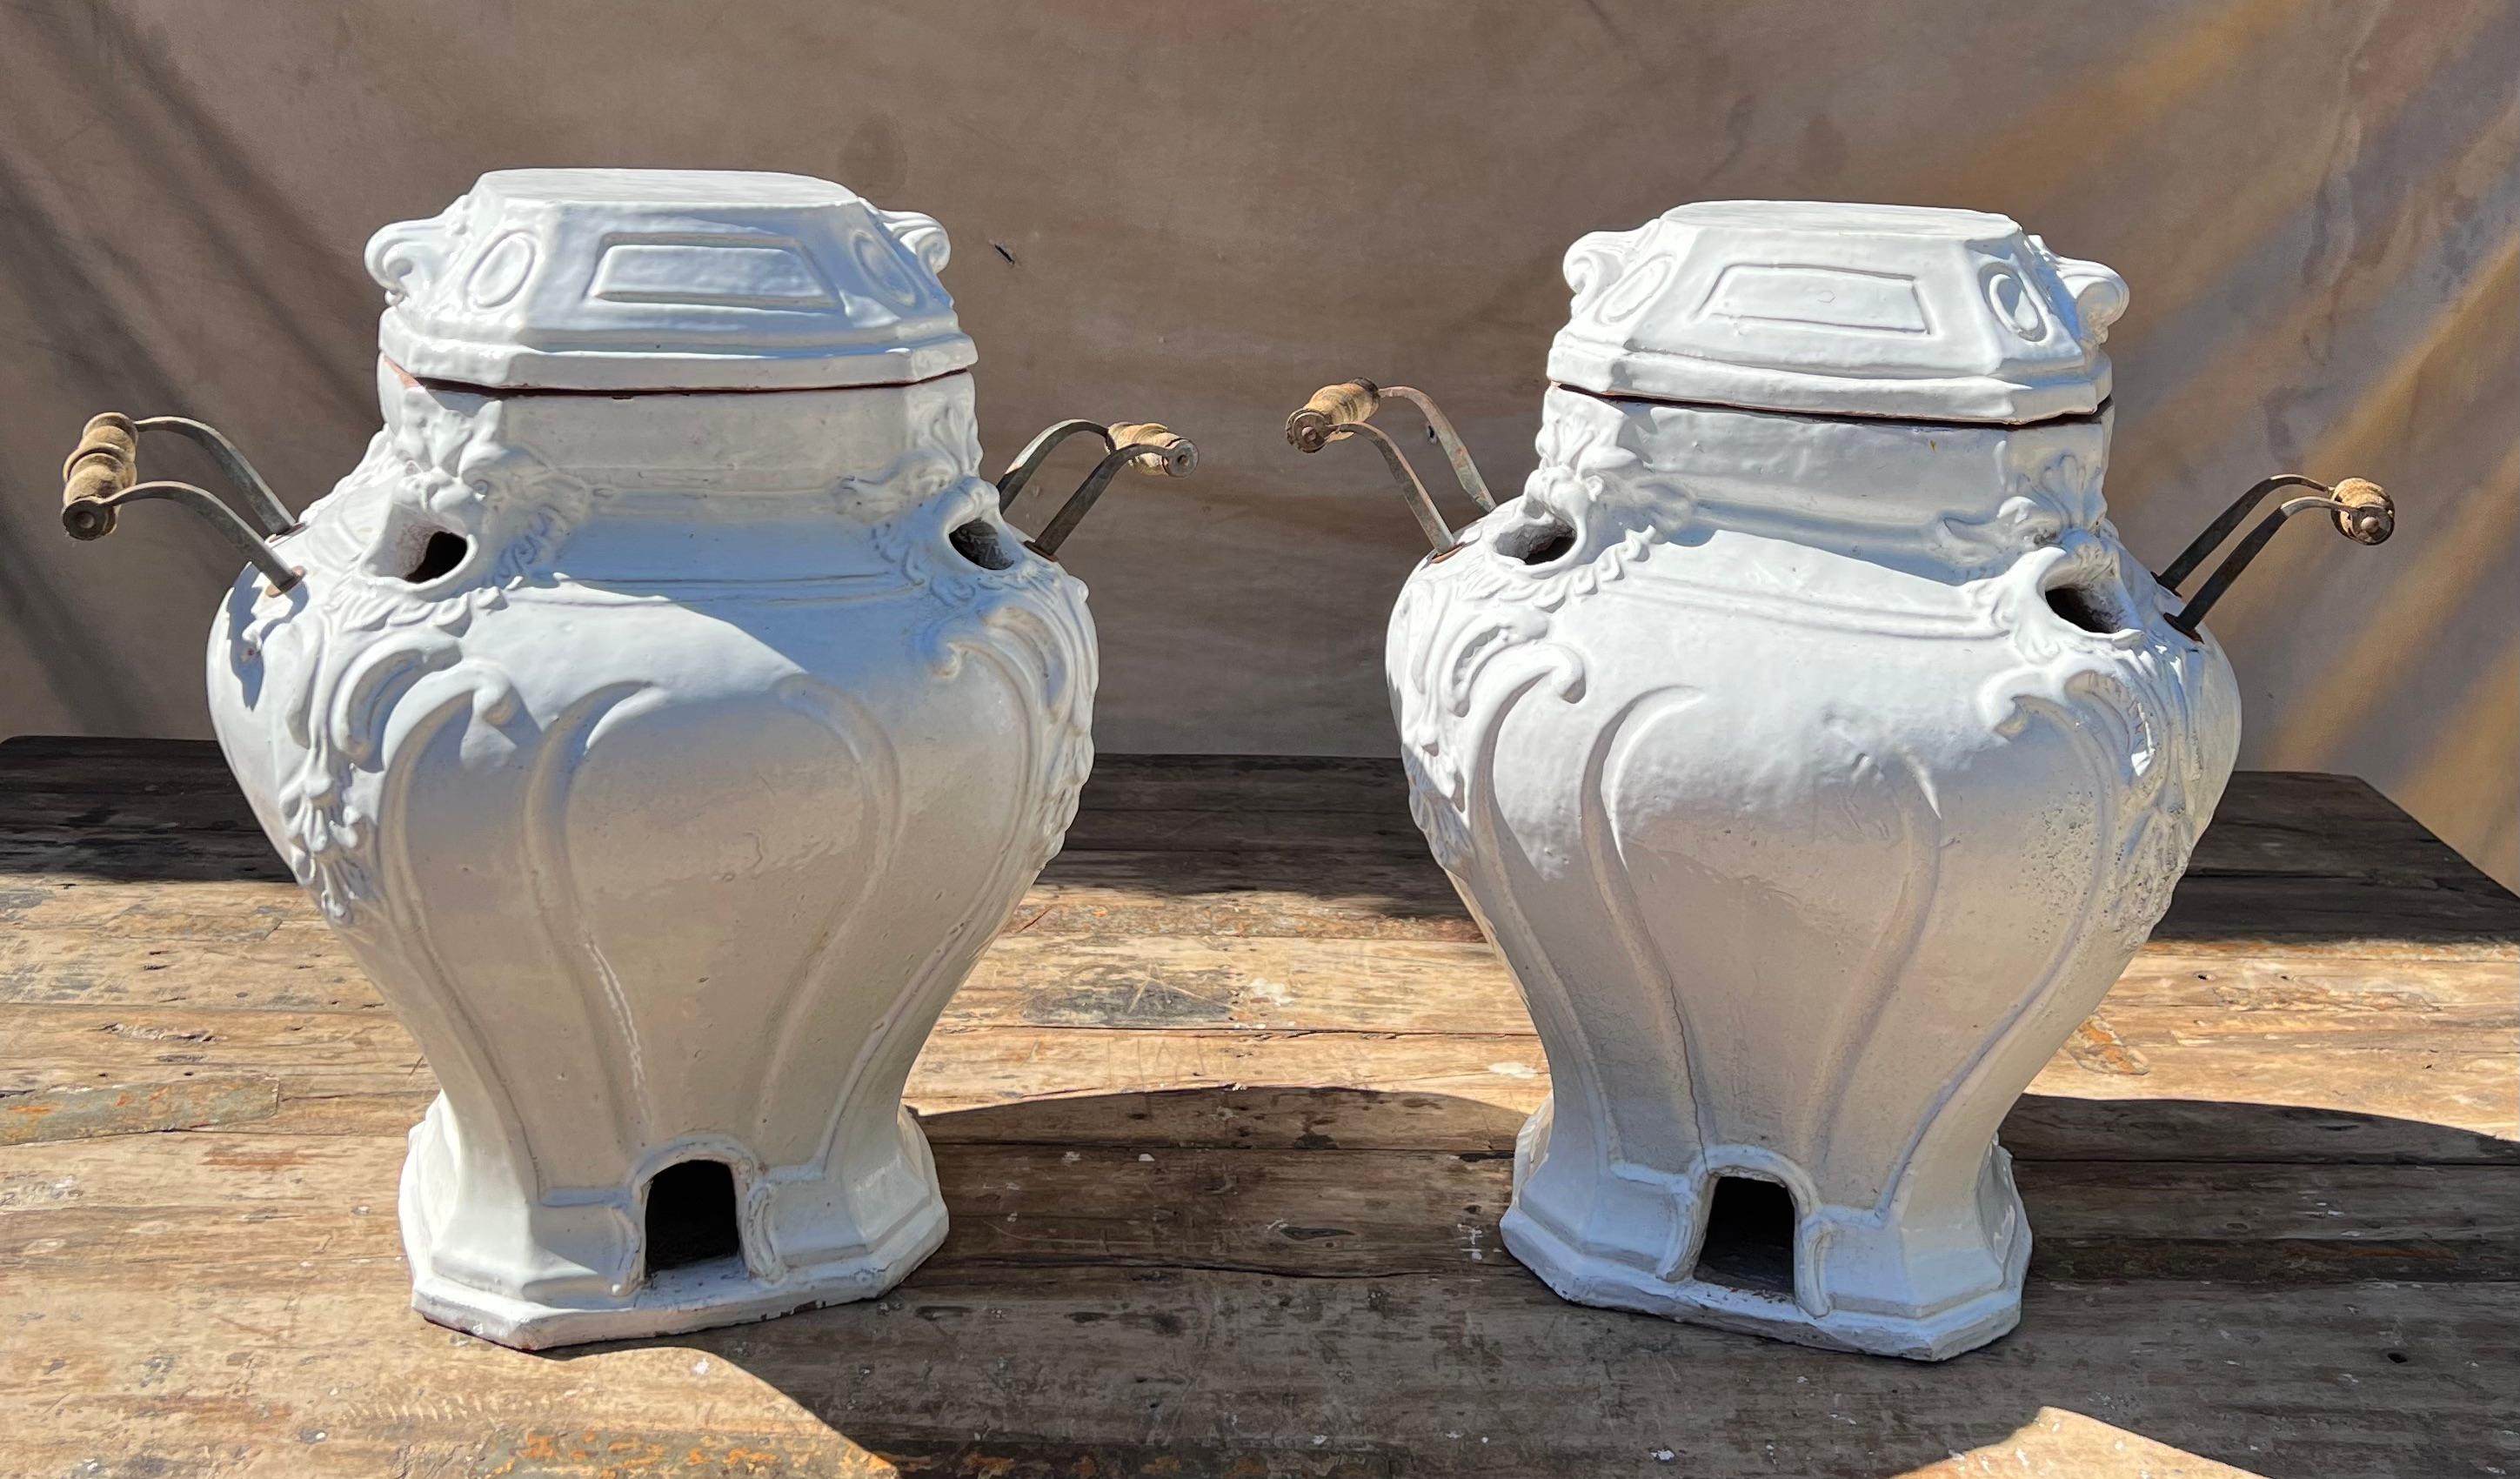 Pair of Glazed Terracotta Garden Urns or Jardinieres with Metal and Wood Handles For Sale 4